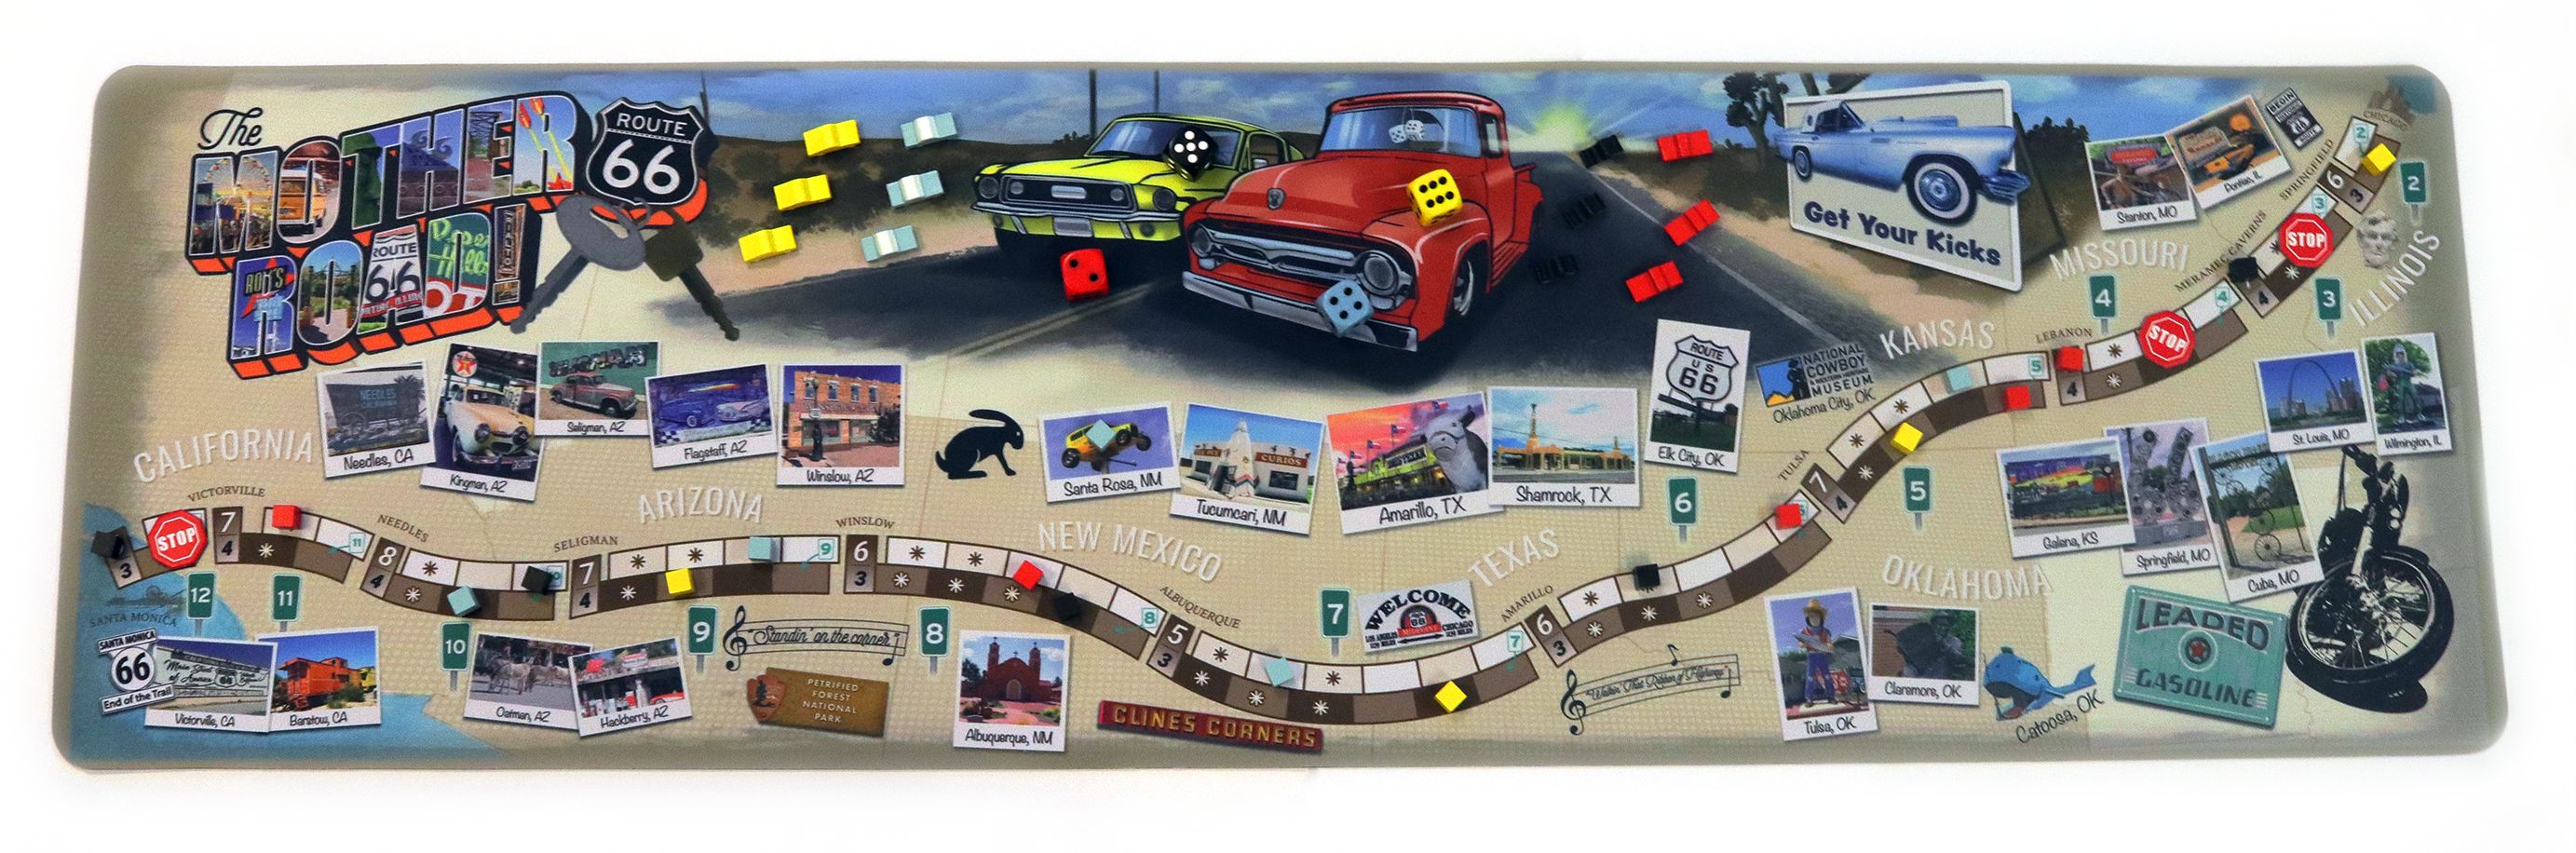 Buy The Mother Road: Route 66 Online Game